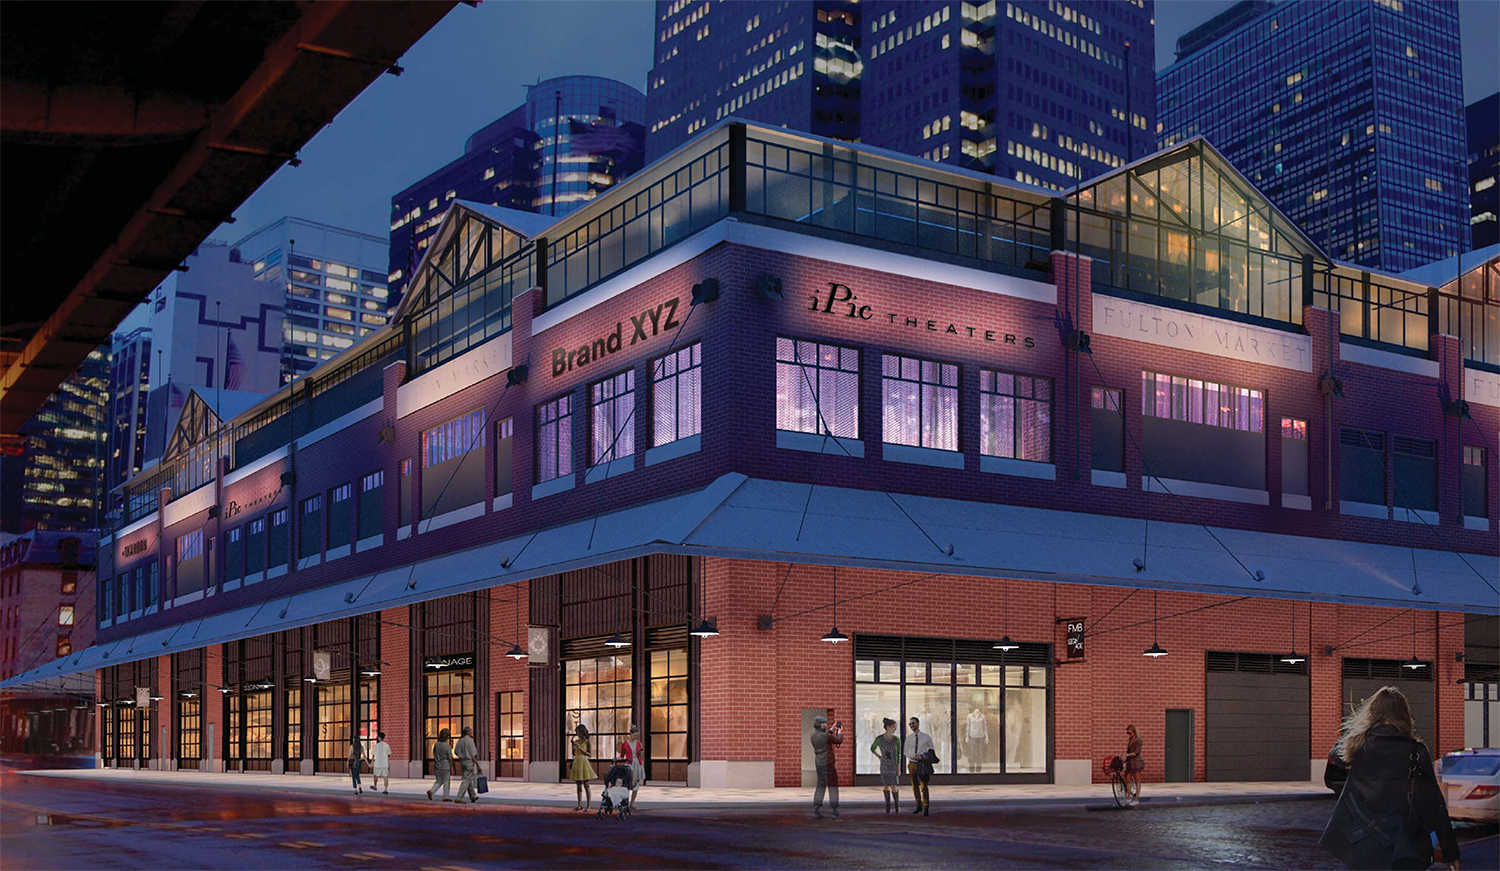 Proposal for Fulton Market Building, viewed from South and Beekman streets, night rendering